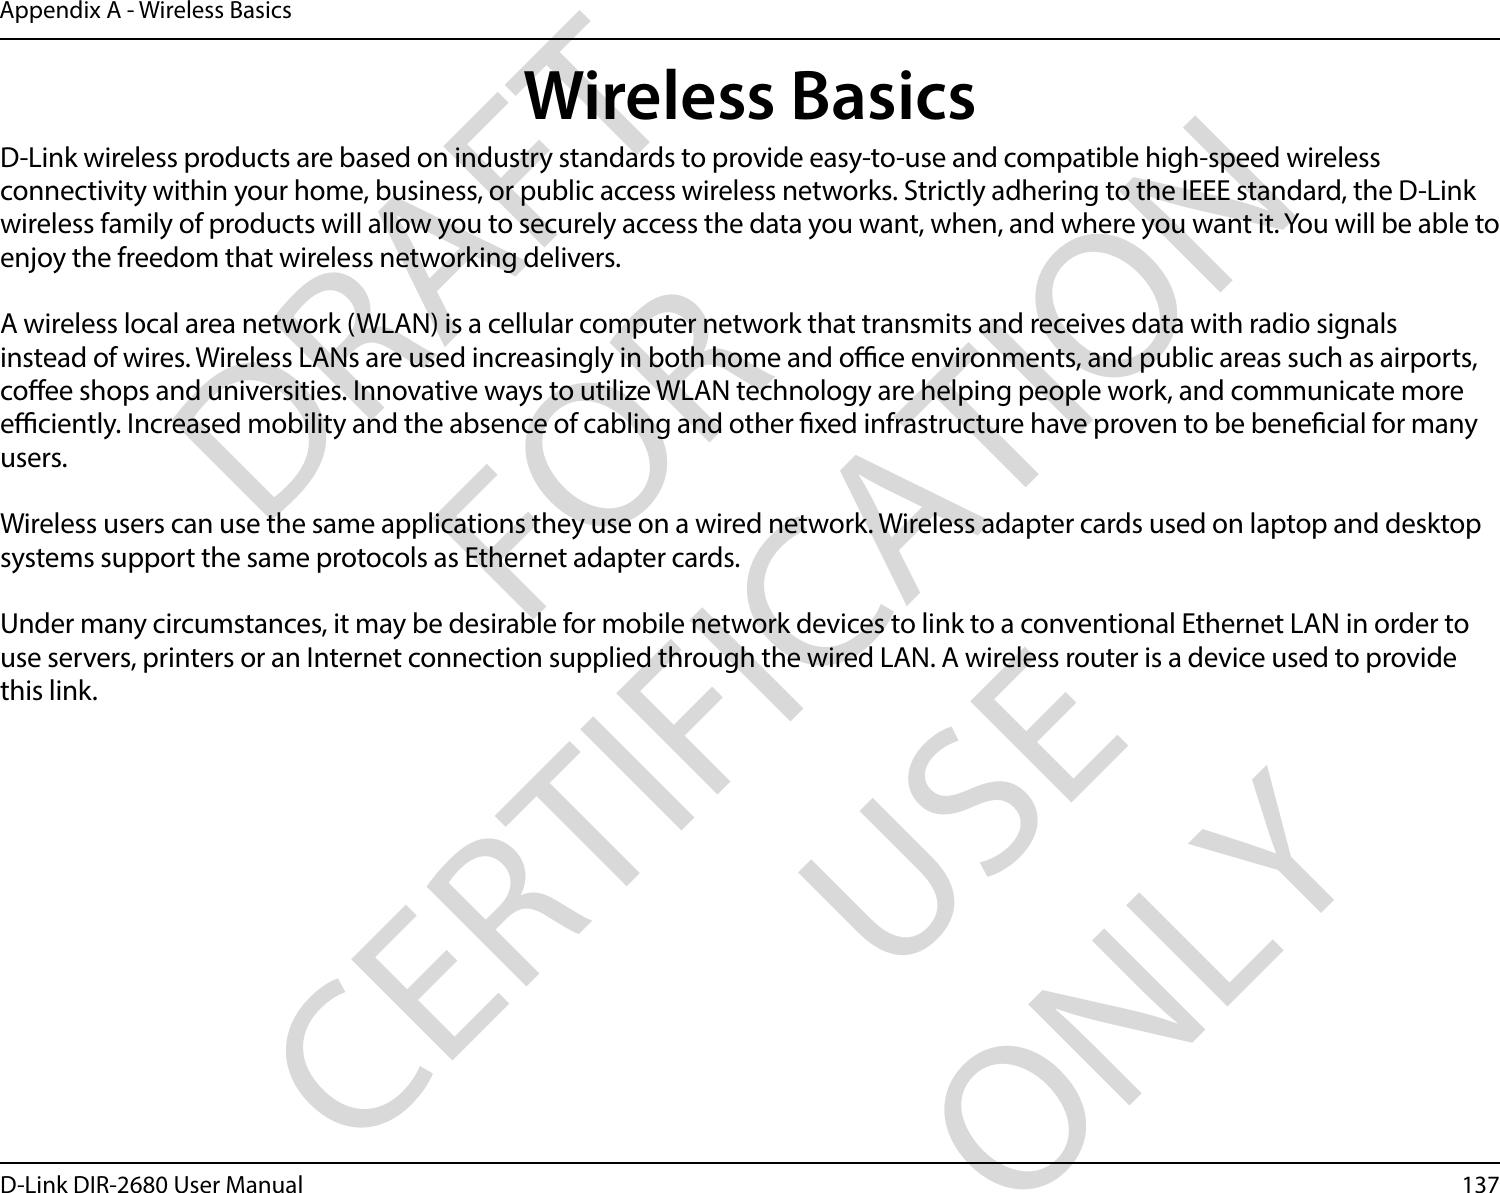 137D-Link DIR-2680 User ManualAppendix A - Wireless BasicsD-Link wireless products are based on industry standards to provide easy-to-use and compatible high-speed wireless connectivity within your home, business, or public access wireless networks. Strictly adhering to the IEEE standard, the D-Link wireless family of products will allow you to securely access the data you want, when, and where you want it. You will be able to enjoy the freedom that wireless networking delivers.A wireless local area network (WLAN) is a cellular computer network that transmits and receives data with radio signals instead of wires. Wireless LANs are used increasingly in both home and oce environments, and public areas such as airports, coee shops and universities. Innovative ways to utilize WLAN technology are helping people work, and communicate more eciently. Increased mobility and the absence of cabling and other xed infrastructure have proven to be benecial for many users. Wireless users can use the same applications they use on a wired network. Wireless adapter cards used on laptop and desktop systems support the same protocols as Ethernet adapter cards. Under many circumstances, it may be desirable for mobile network devices to link to a conventional Ethernet LAN in order to use servers, printers or an Internet connection supplied through the wired LAN. A wireless router is a device used to provide this link.Wireless BasicsDRAFT FOR CERTIFICATION USE ONLY